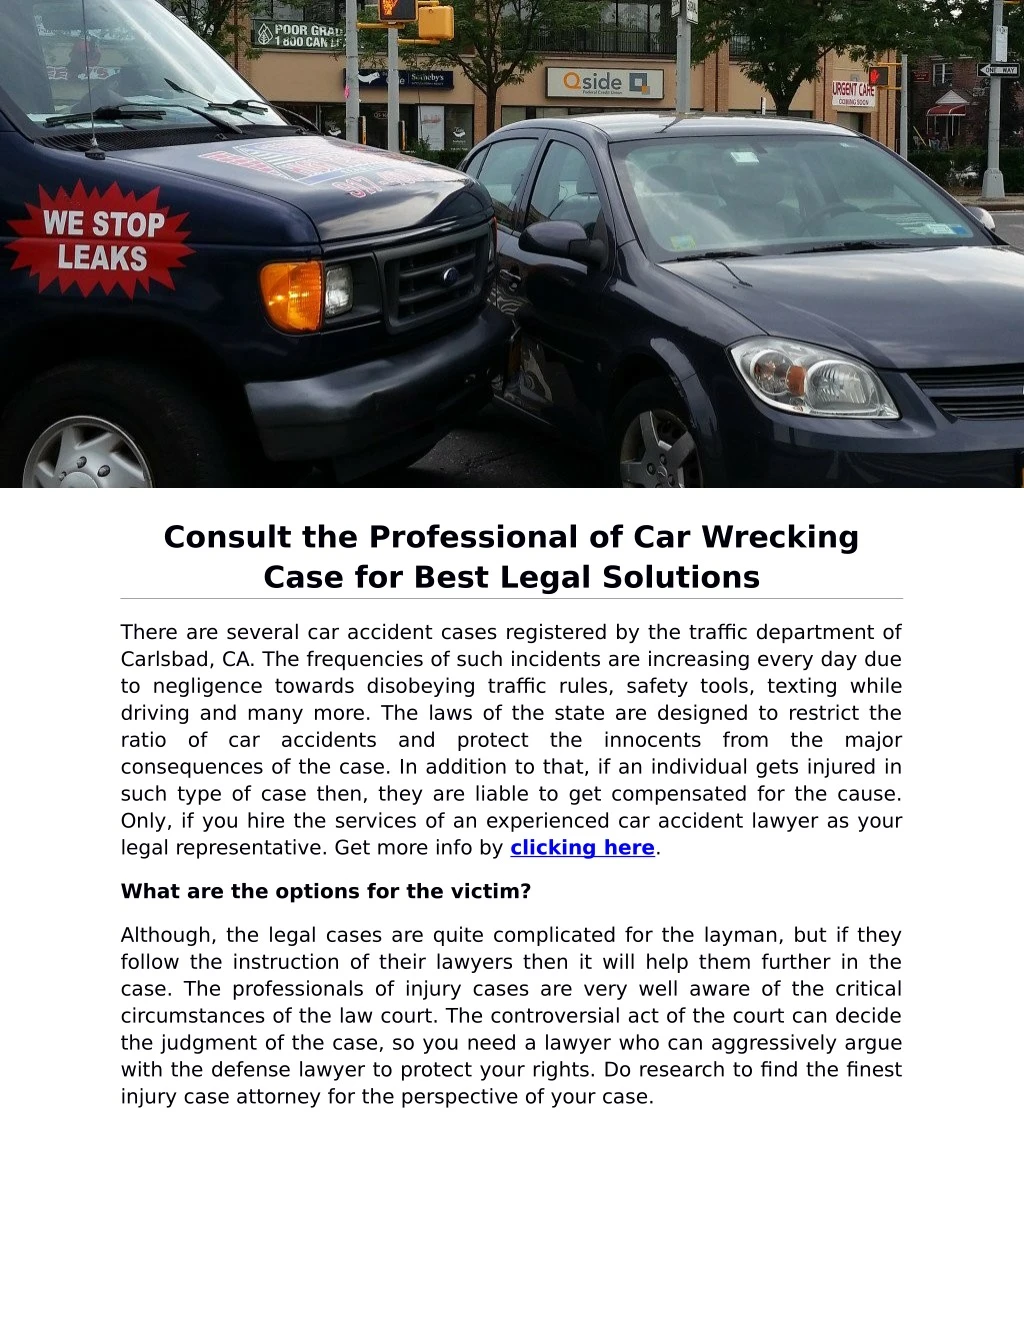 consult the professional of car wrecking case